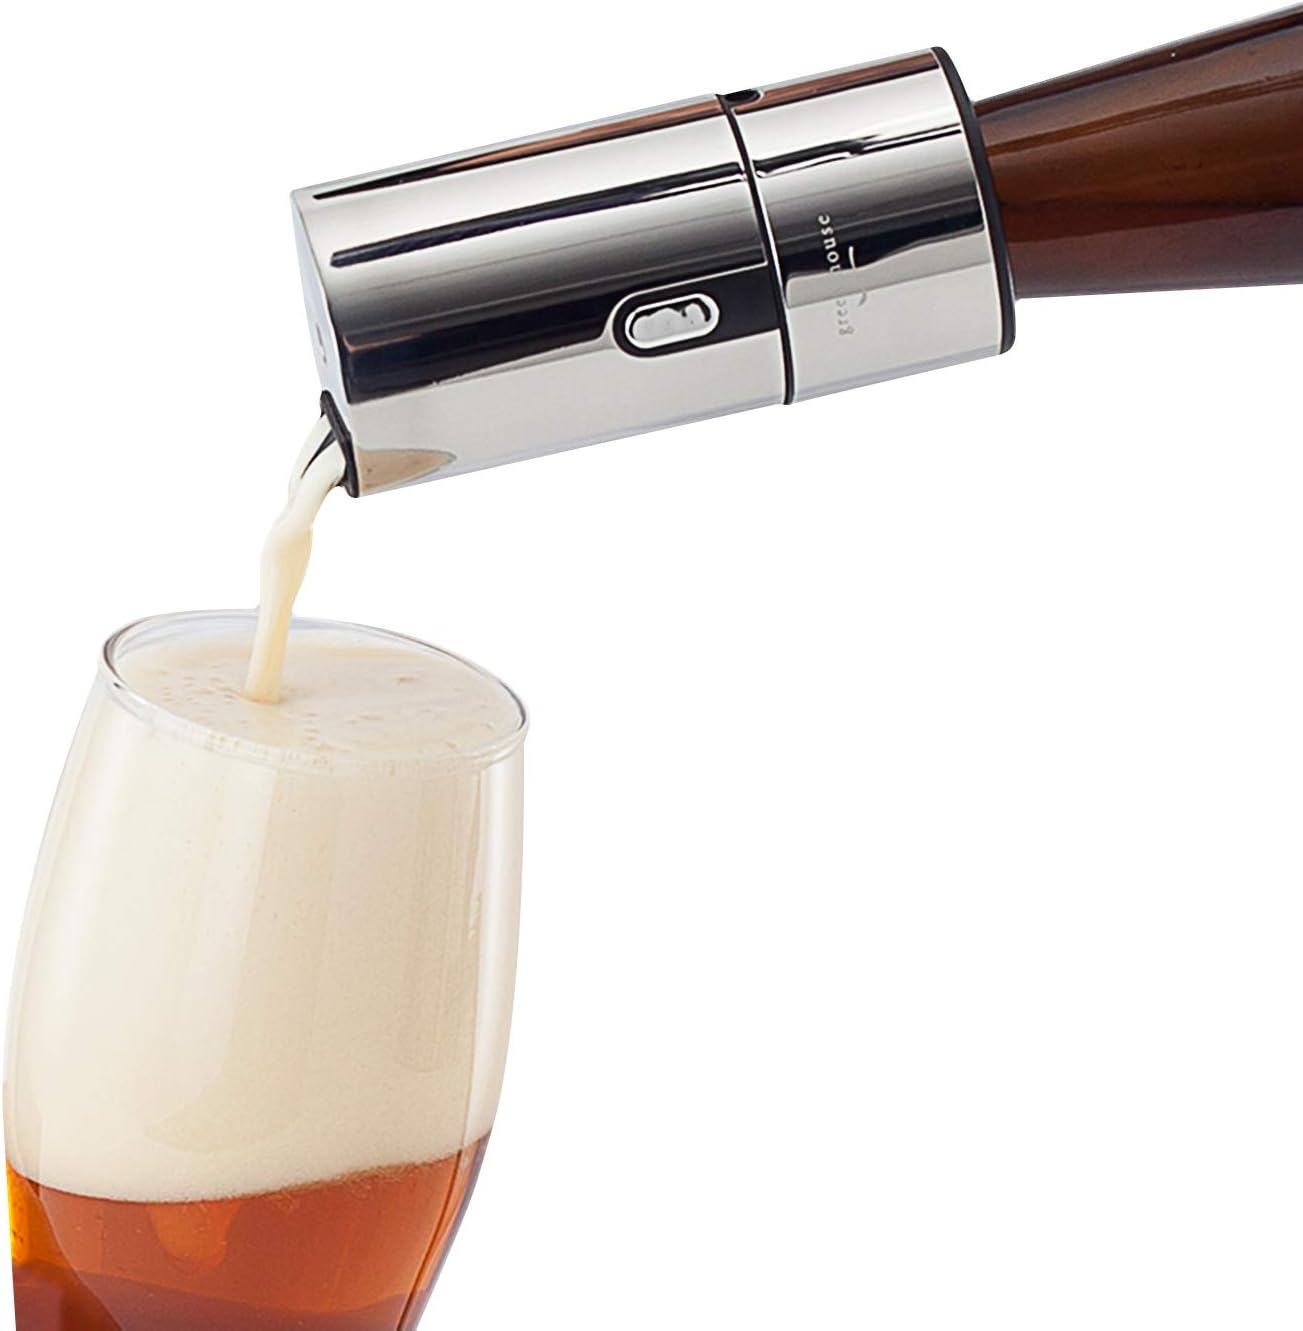 Easy to use and makes the beer better. Nothing to dislike